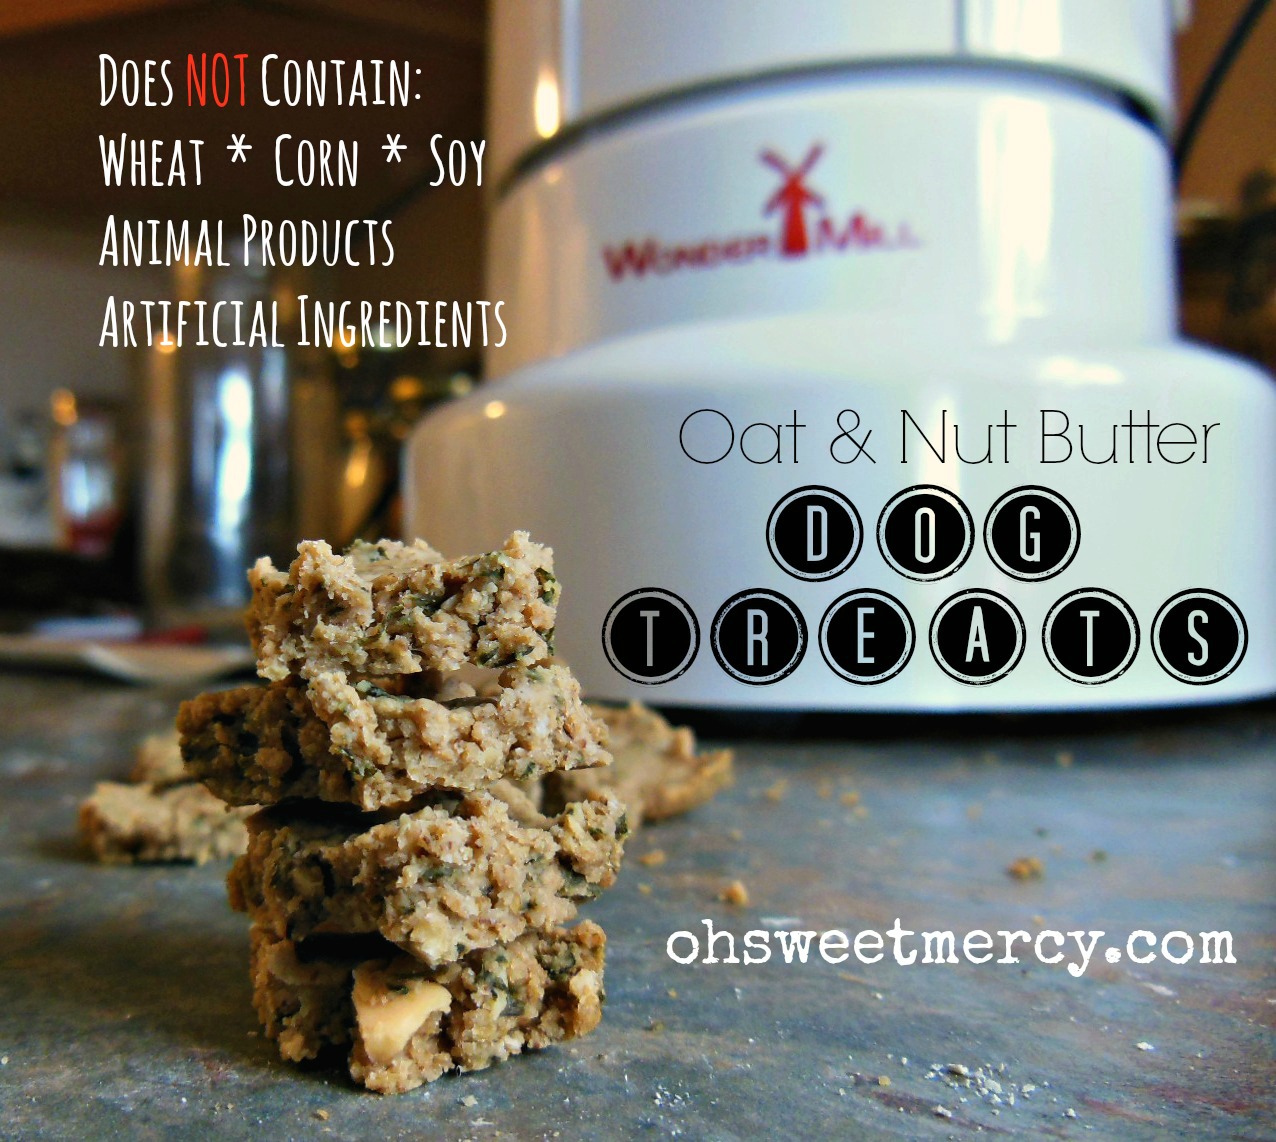 Oat and Nut Butter Dog Treats